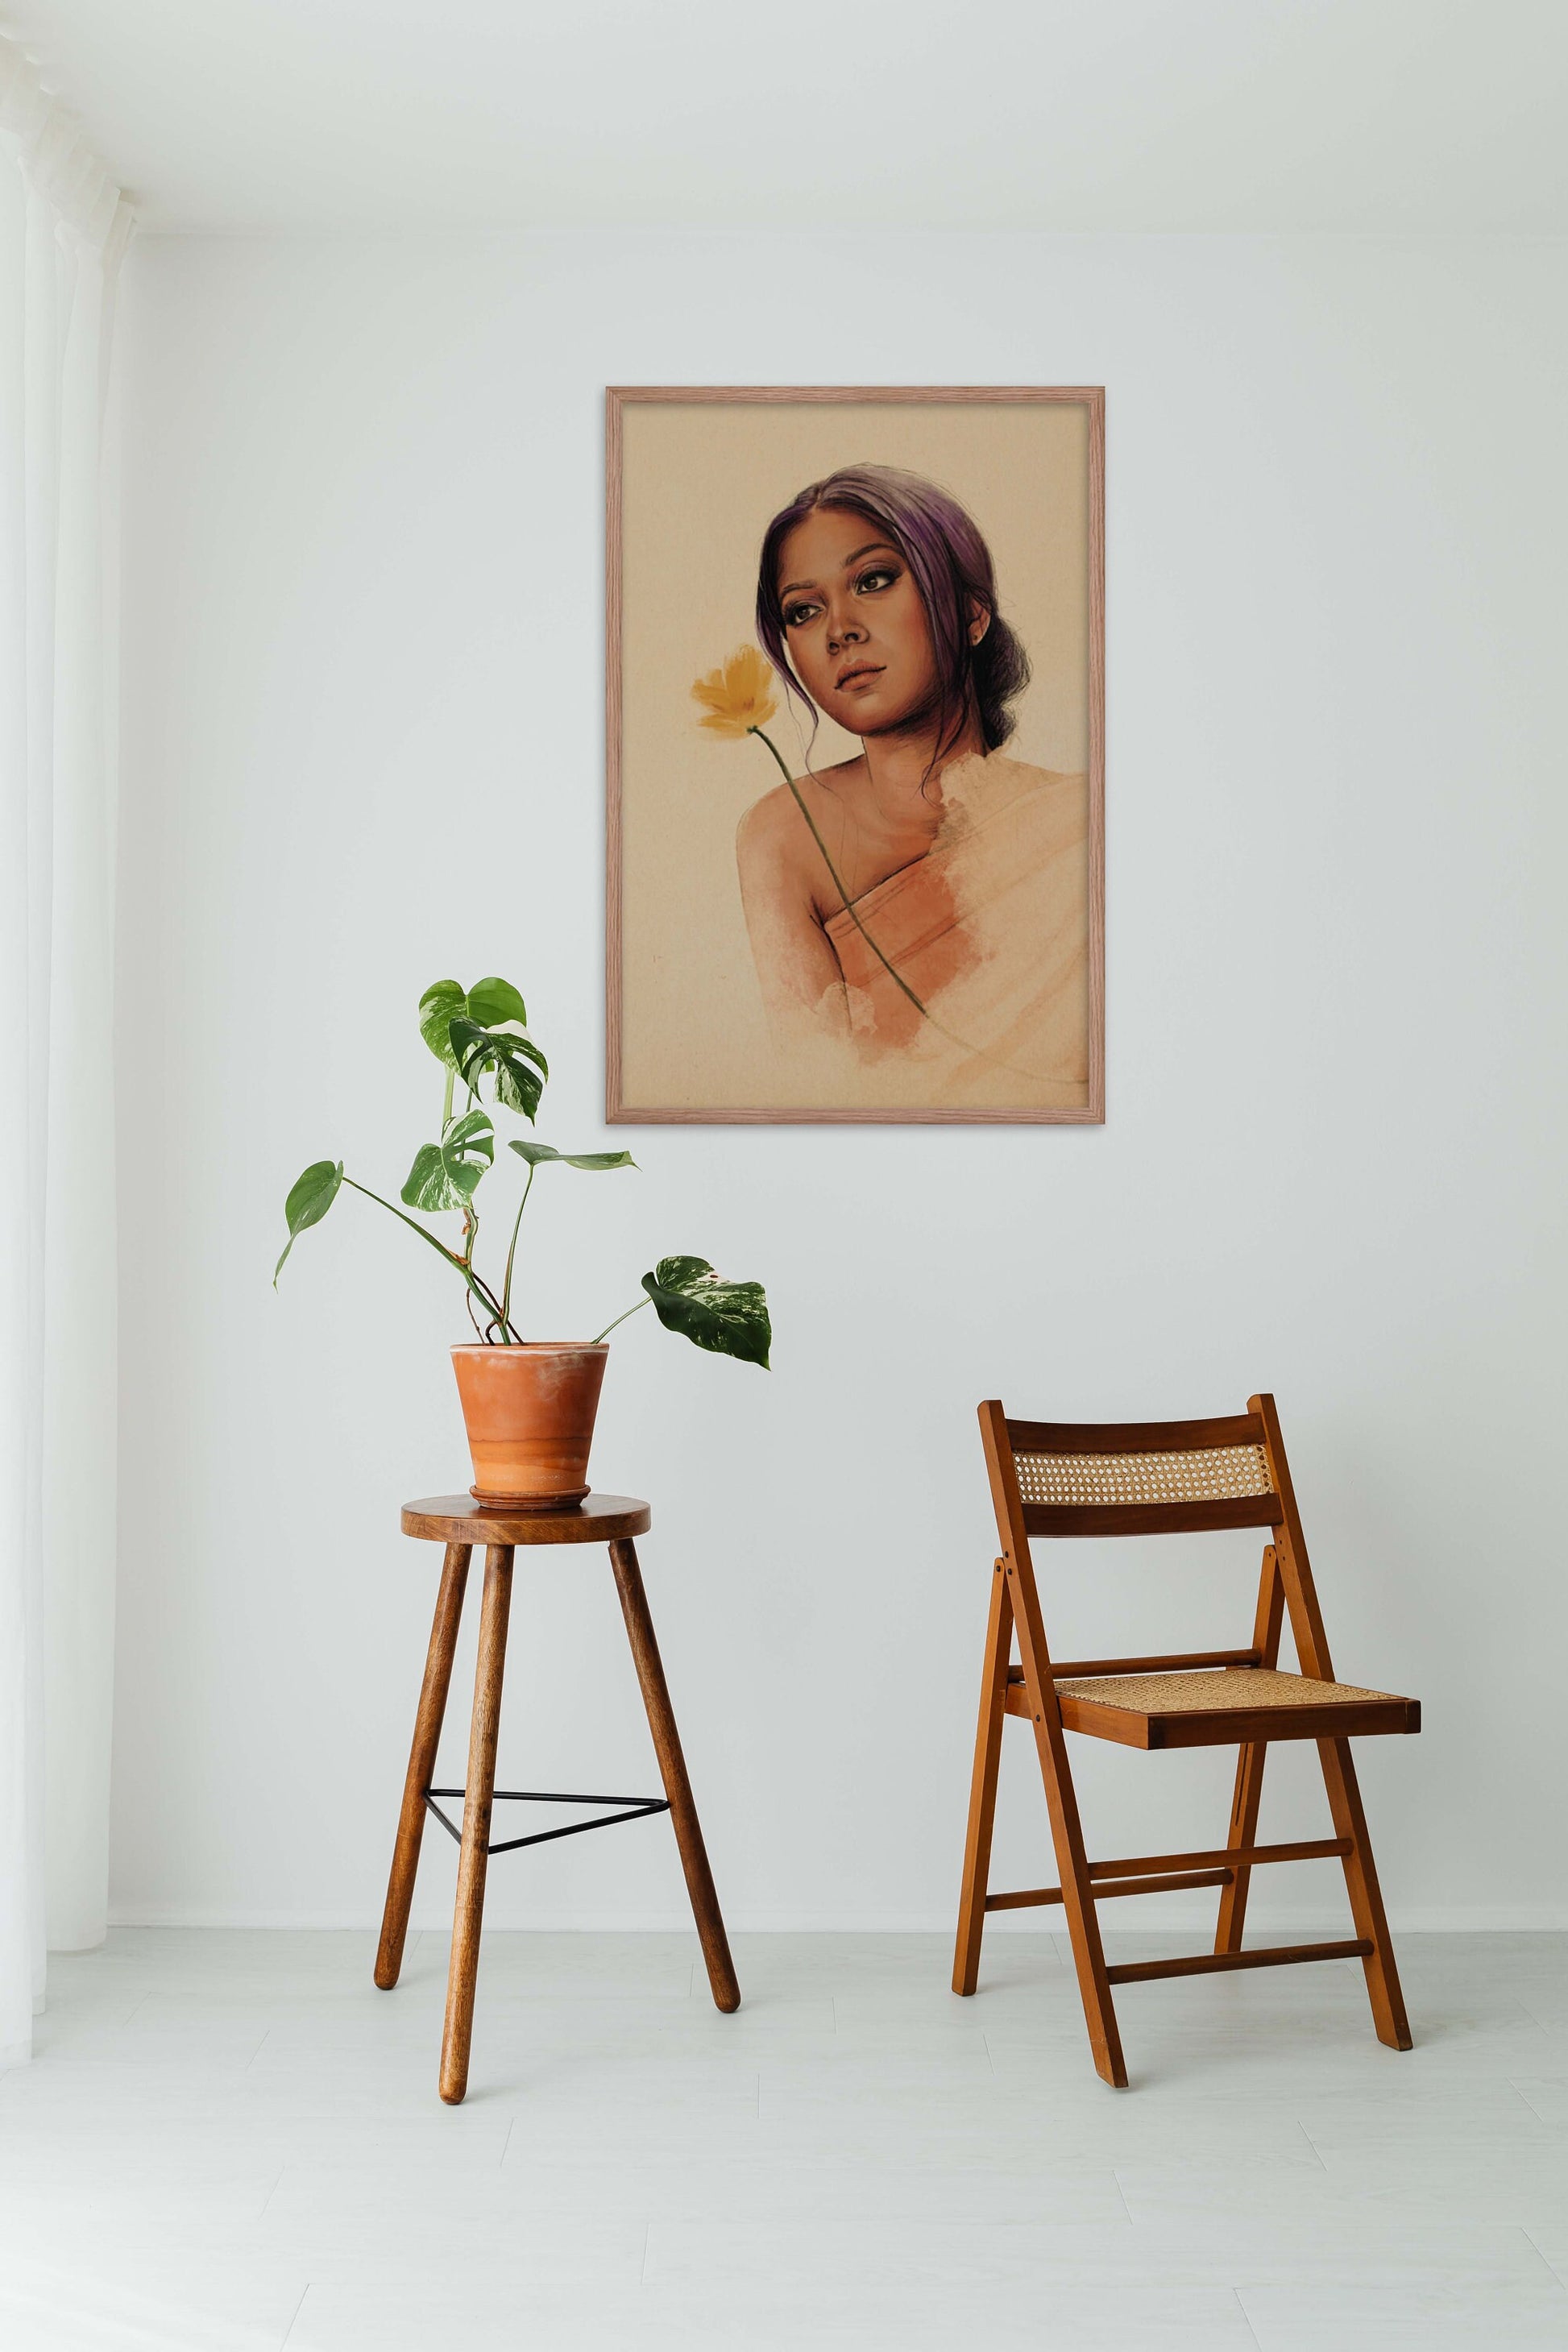 Simple Indian Woman in rust color saree with yellow flower wall art poster in oak frame